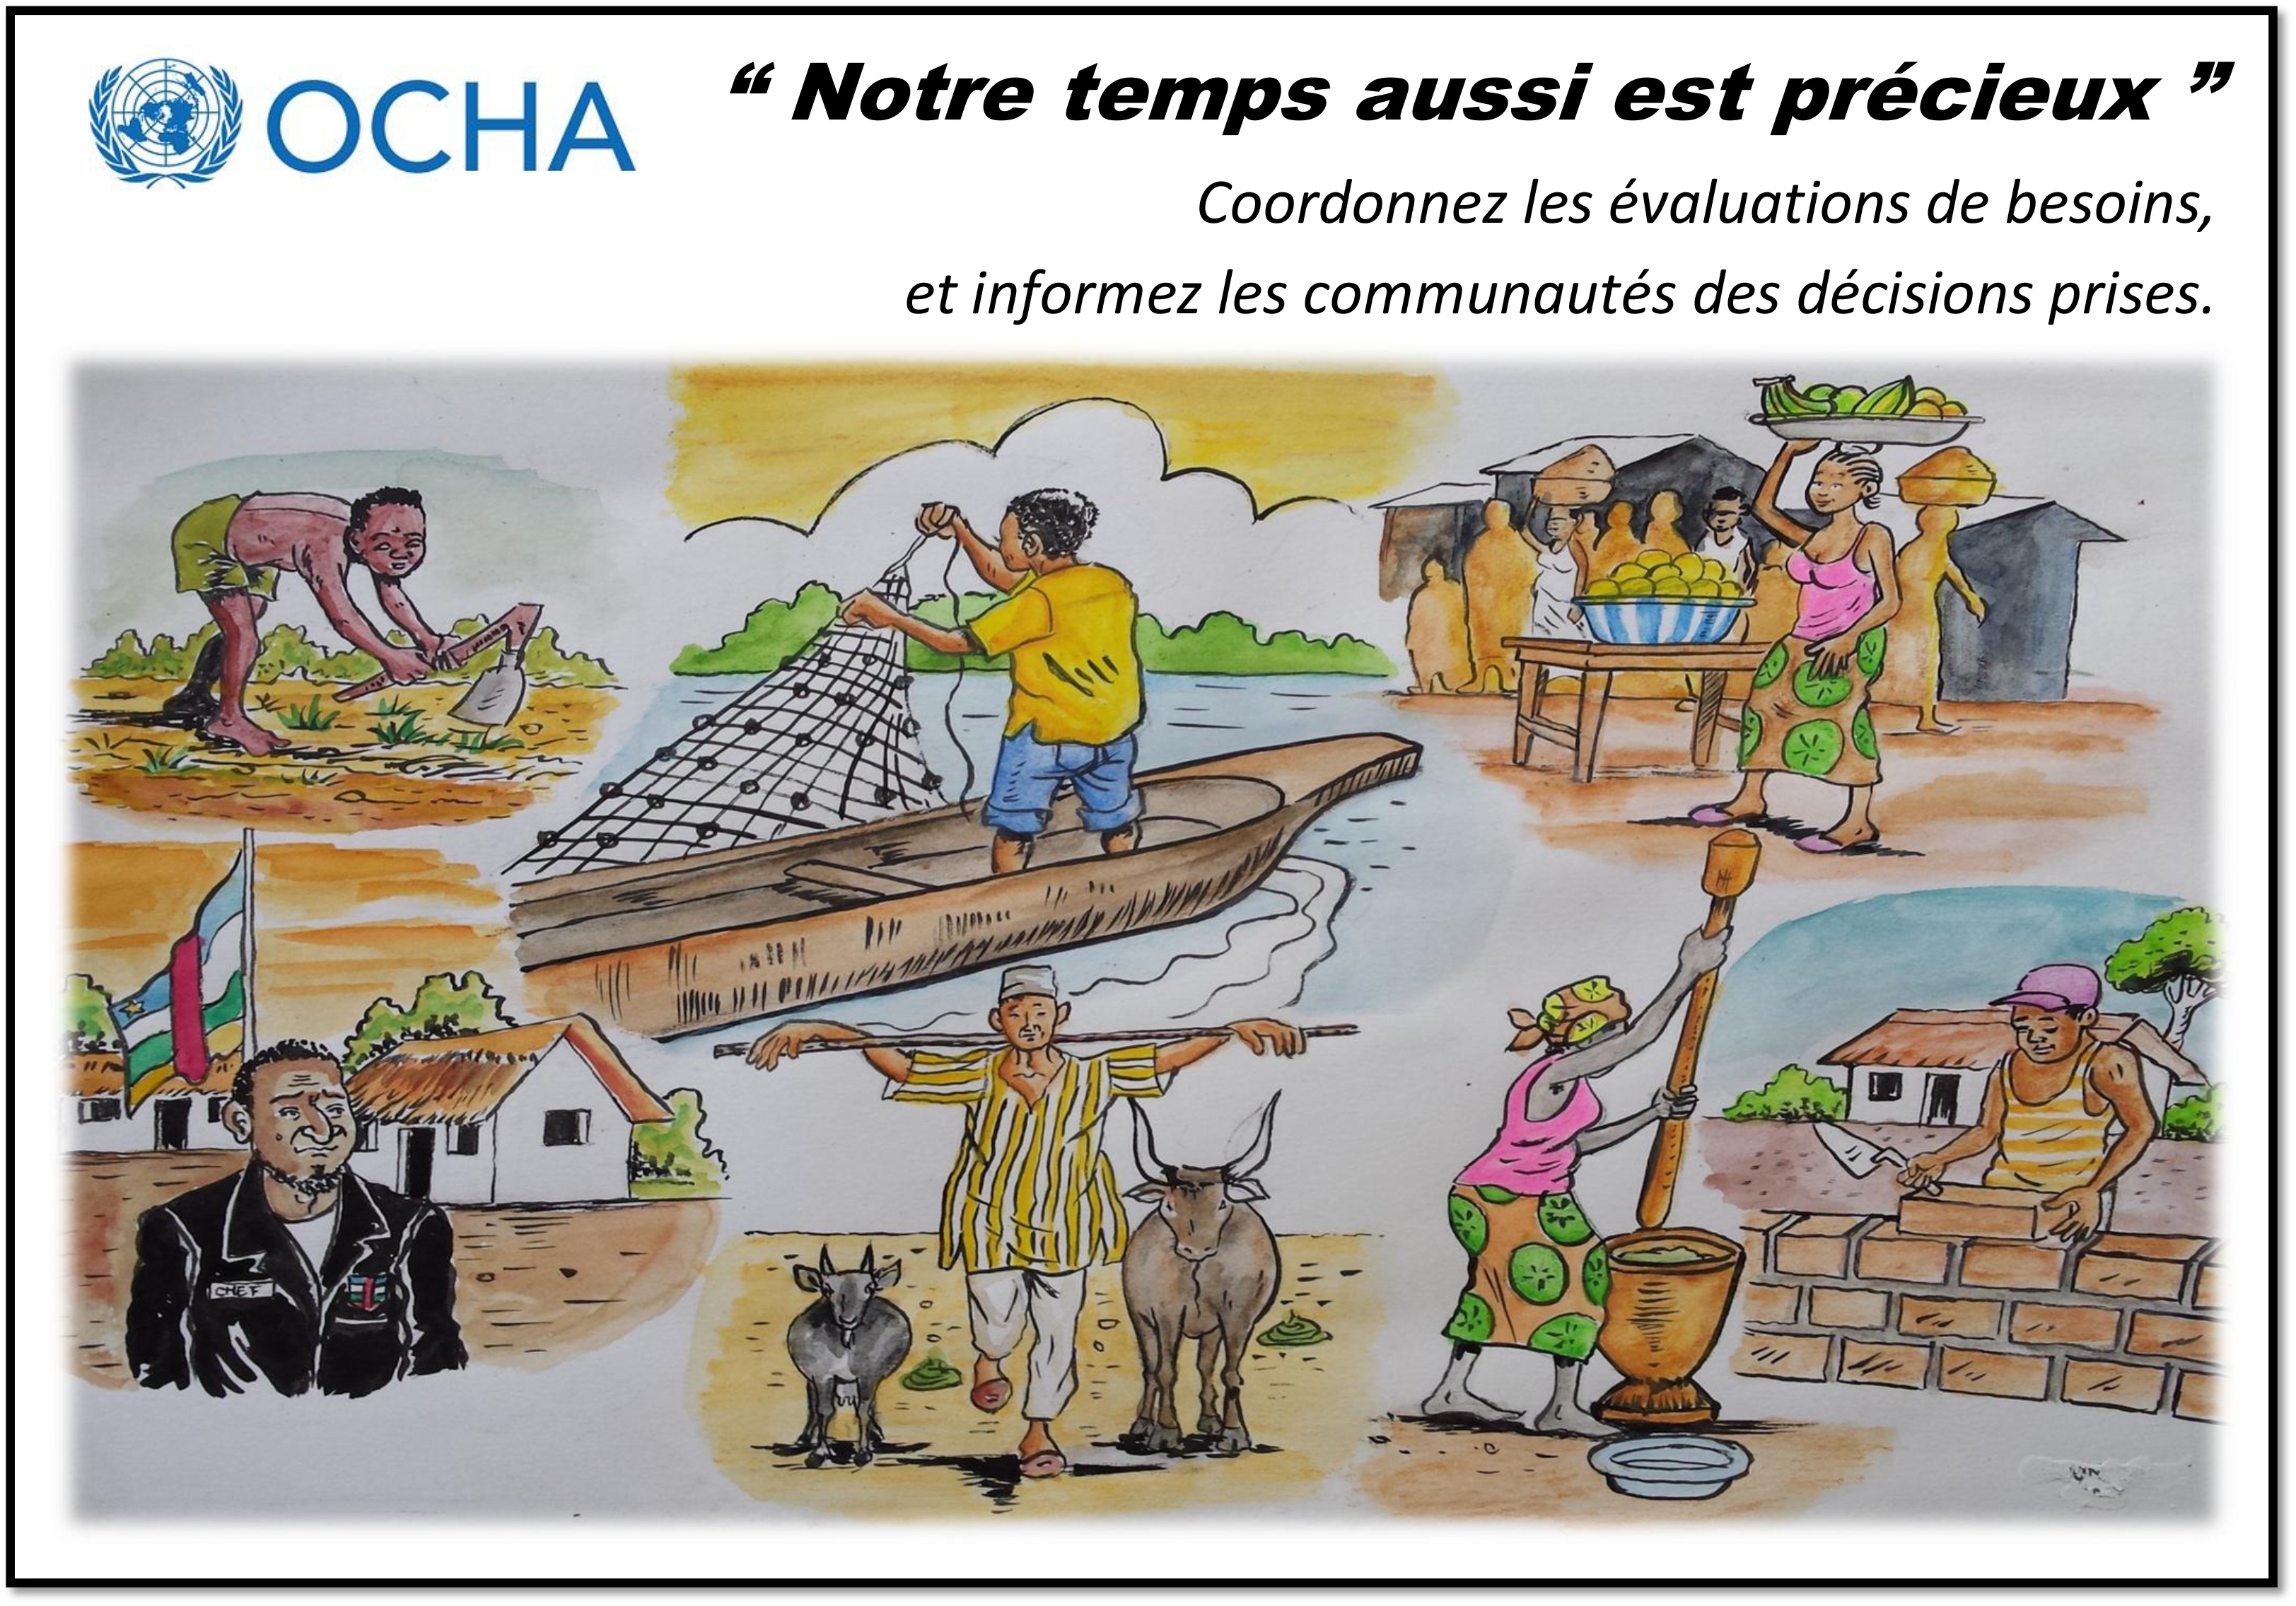 Poster aimed at aid workers to promote accountability with communities